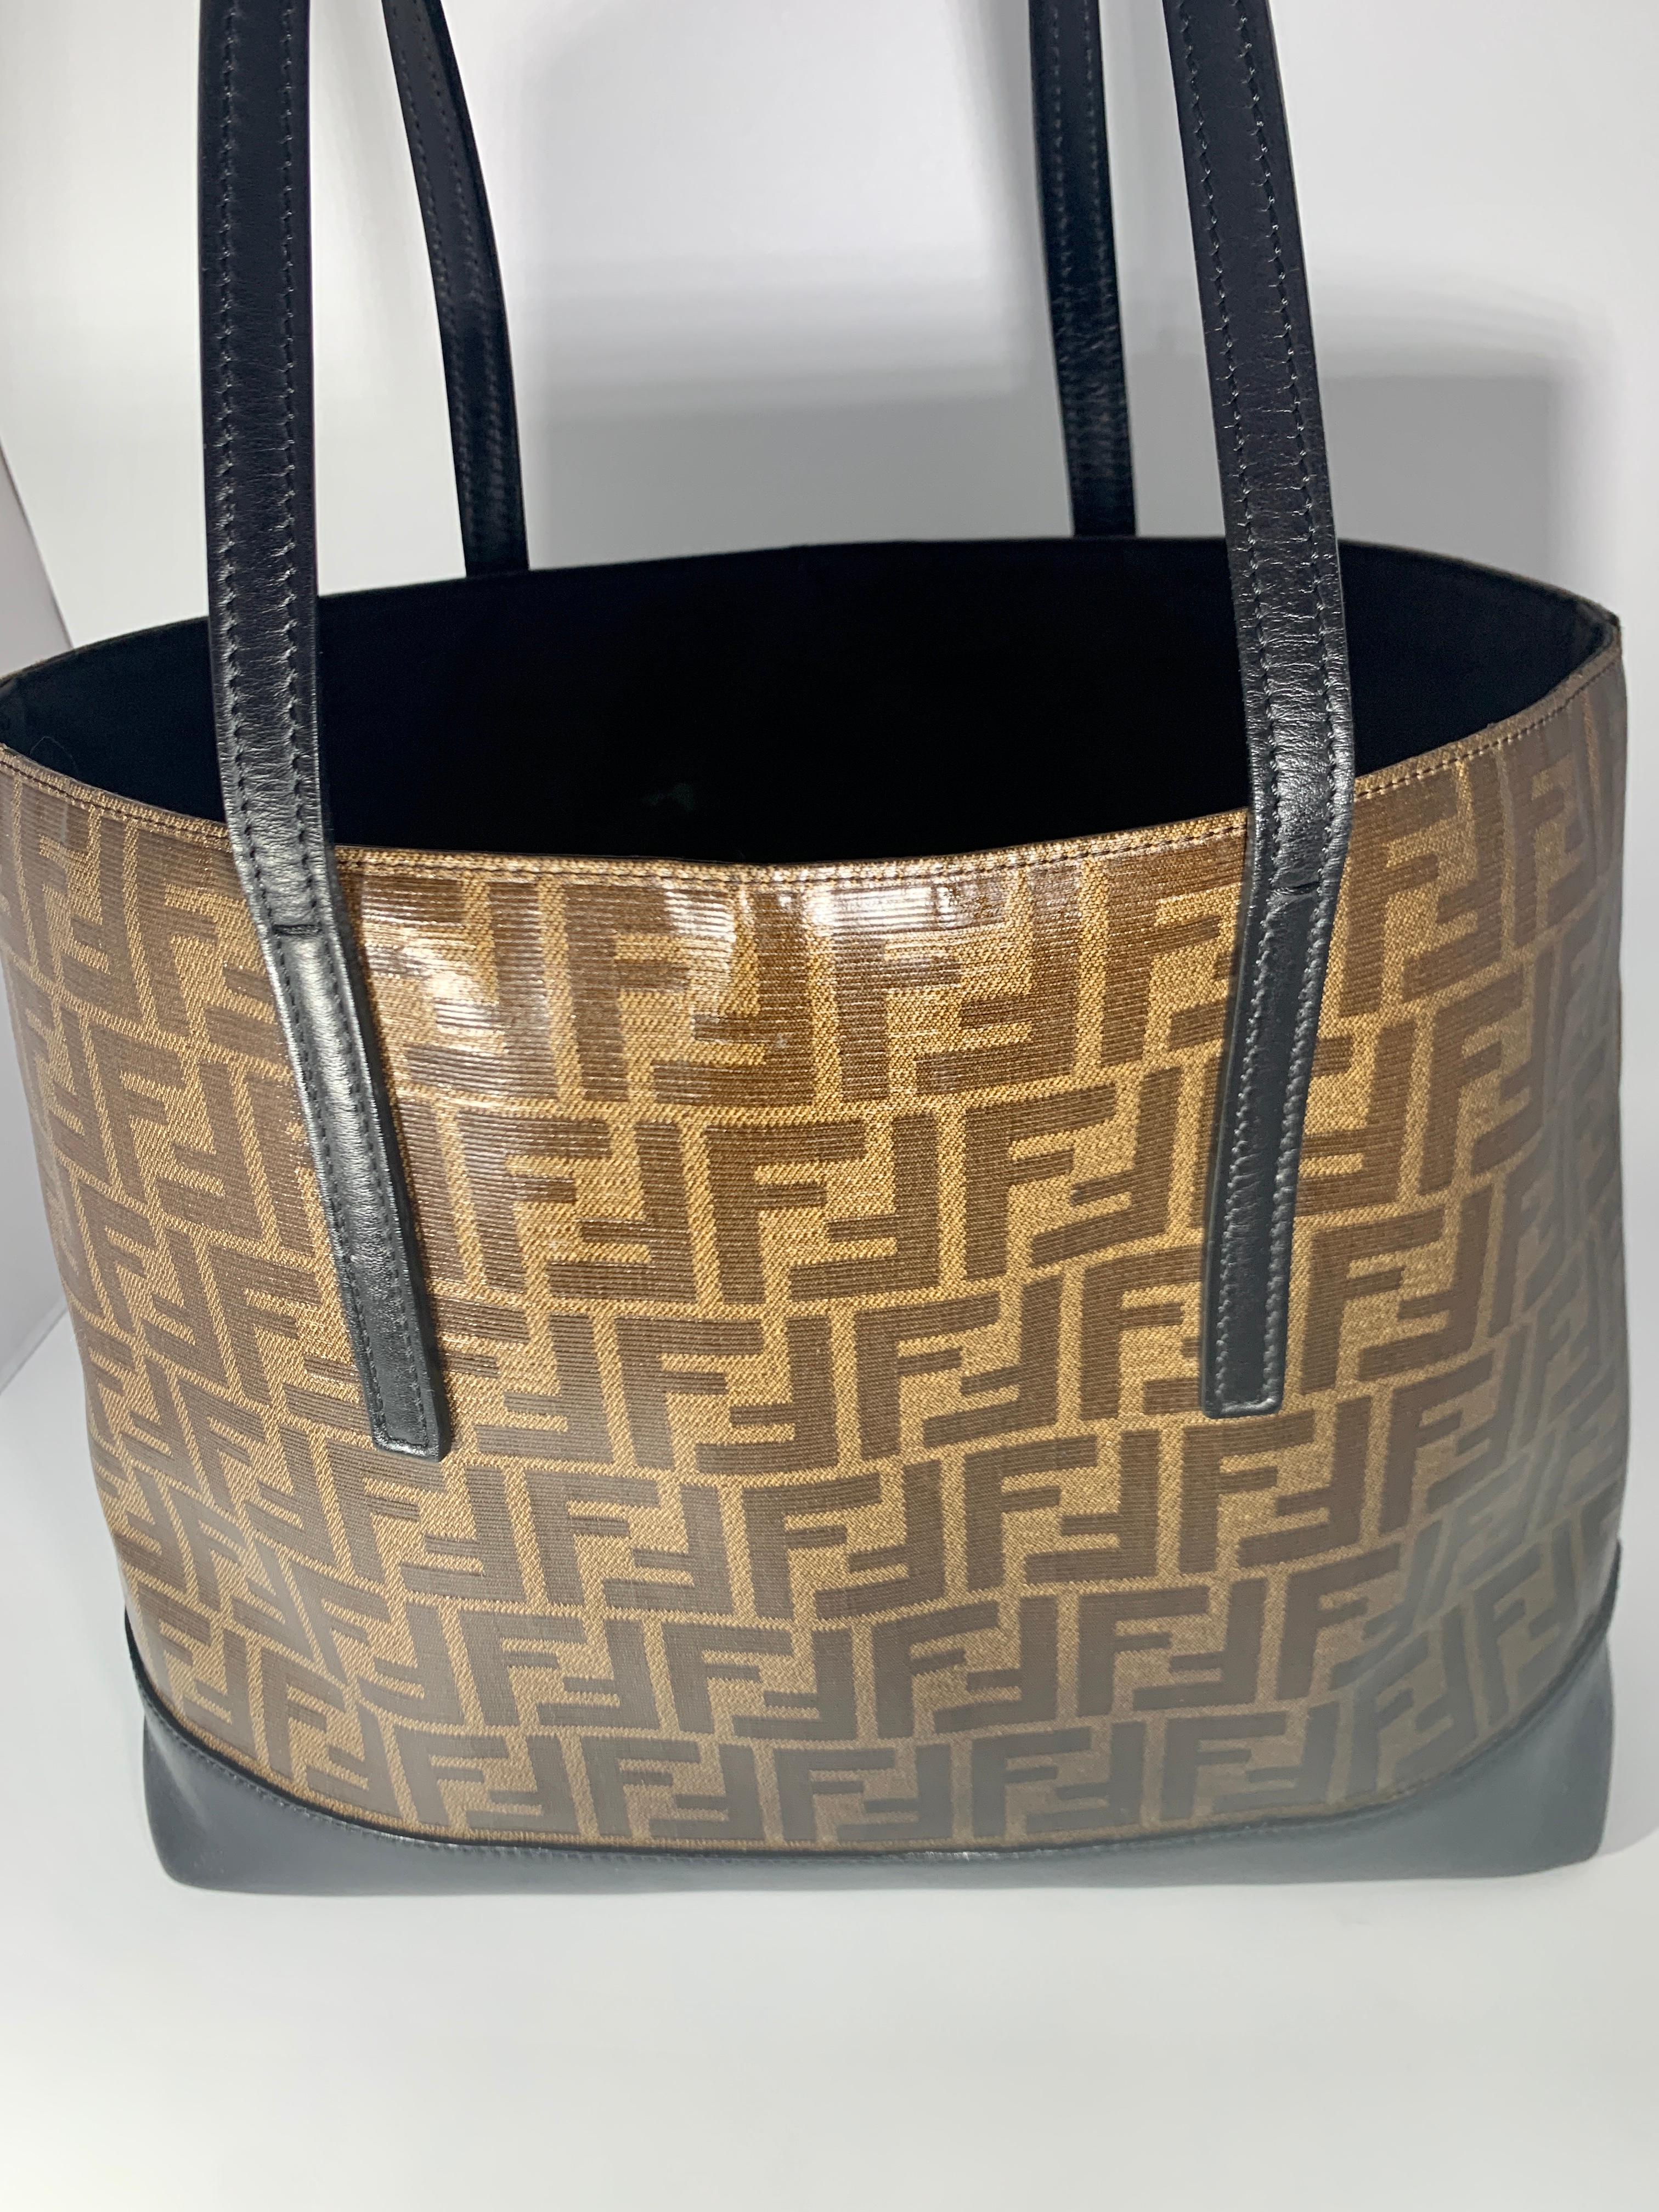 Fendi FF  Logo Print  Neverful Tote Bag - Women - Leather/ Coated  Canvas, Brown/Black
Brown FF print tote bag from Fendi Pre-Owned featuring FF logo print, two top handles, 
 one zippered  pocket inside 
Bottom  and handles are black leather.
Very